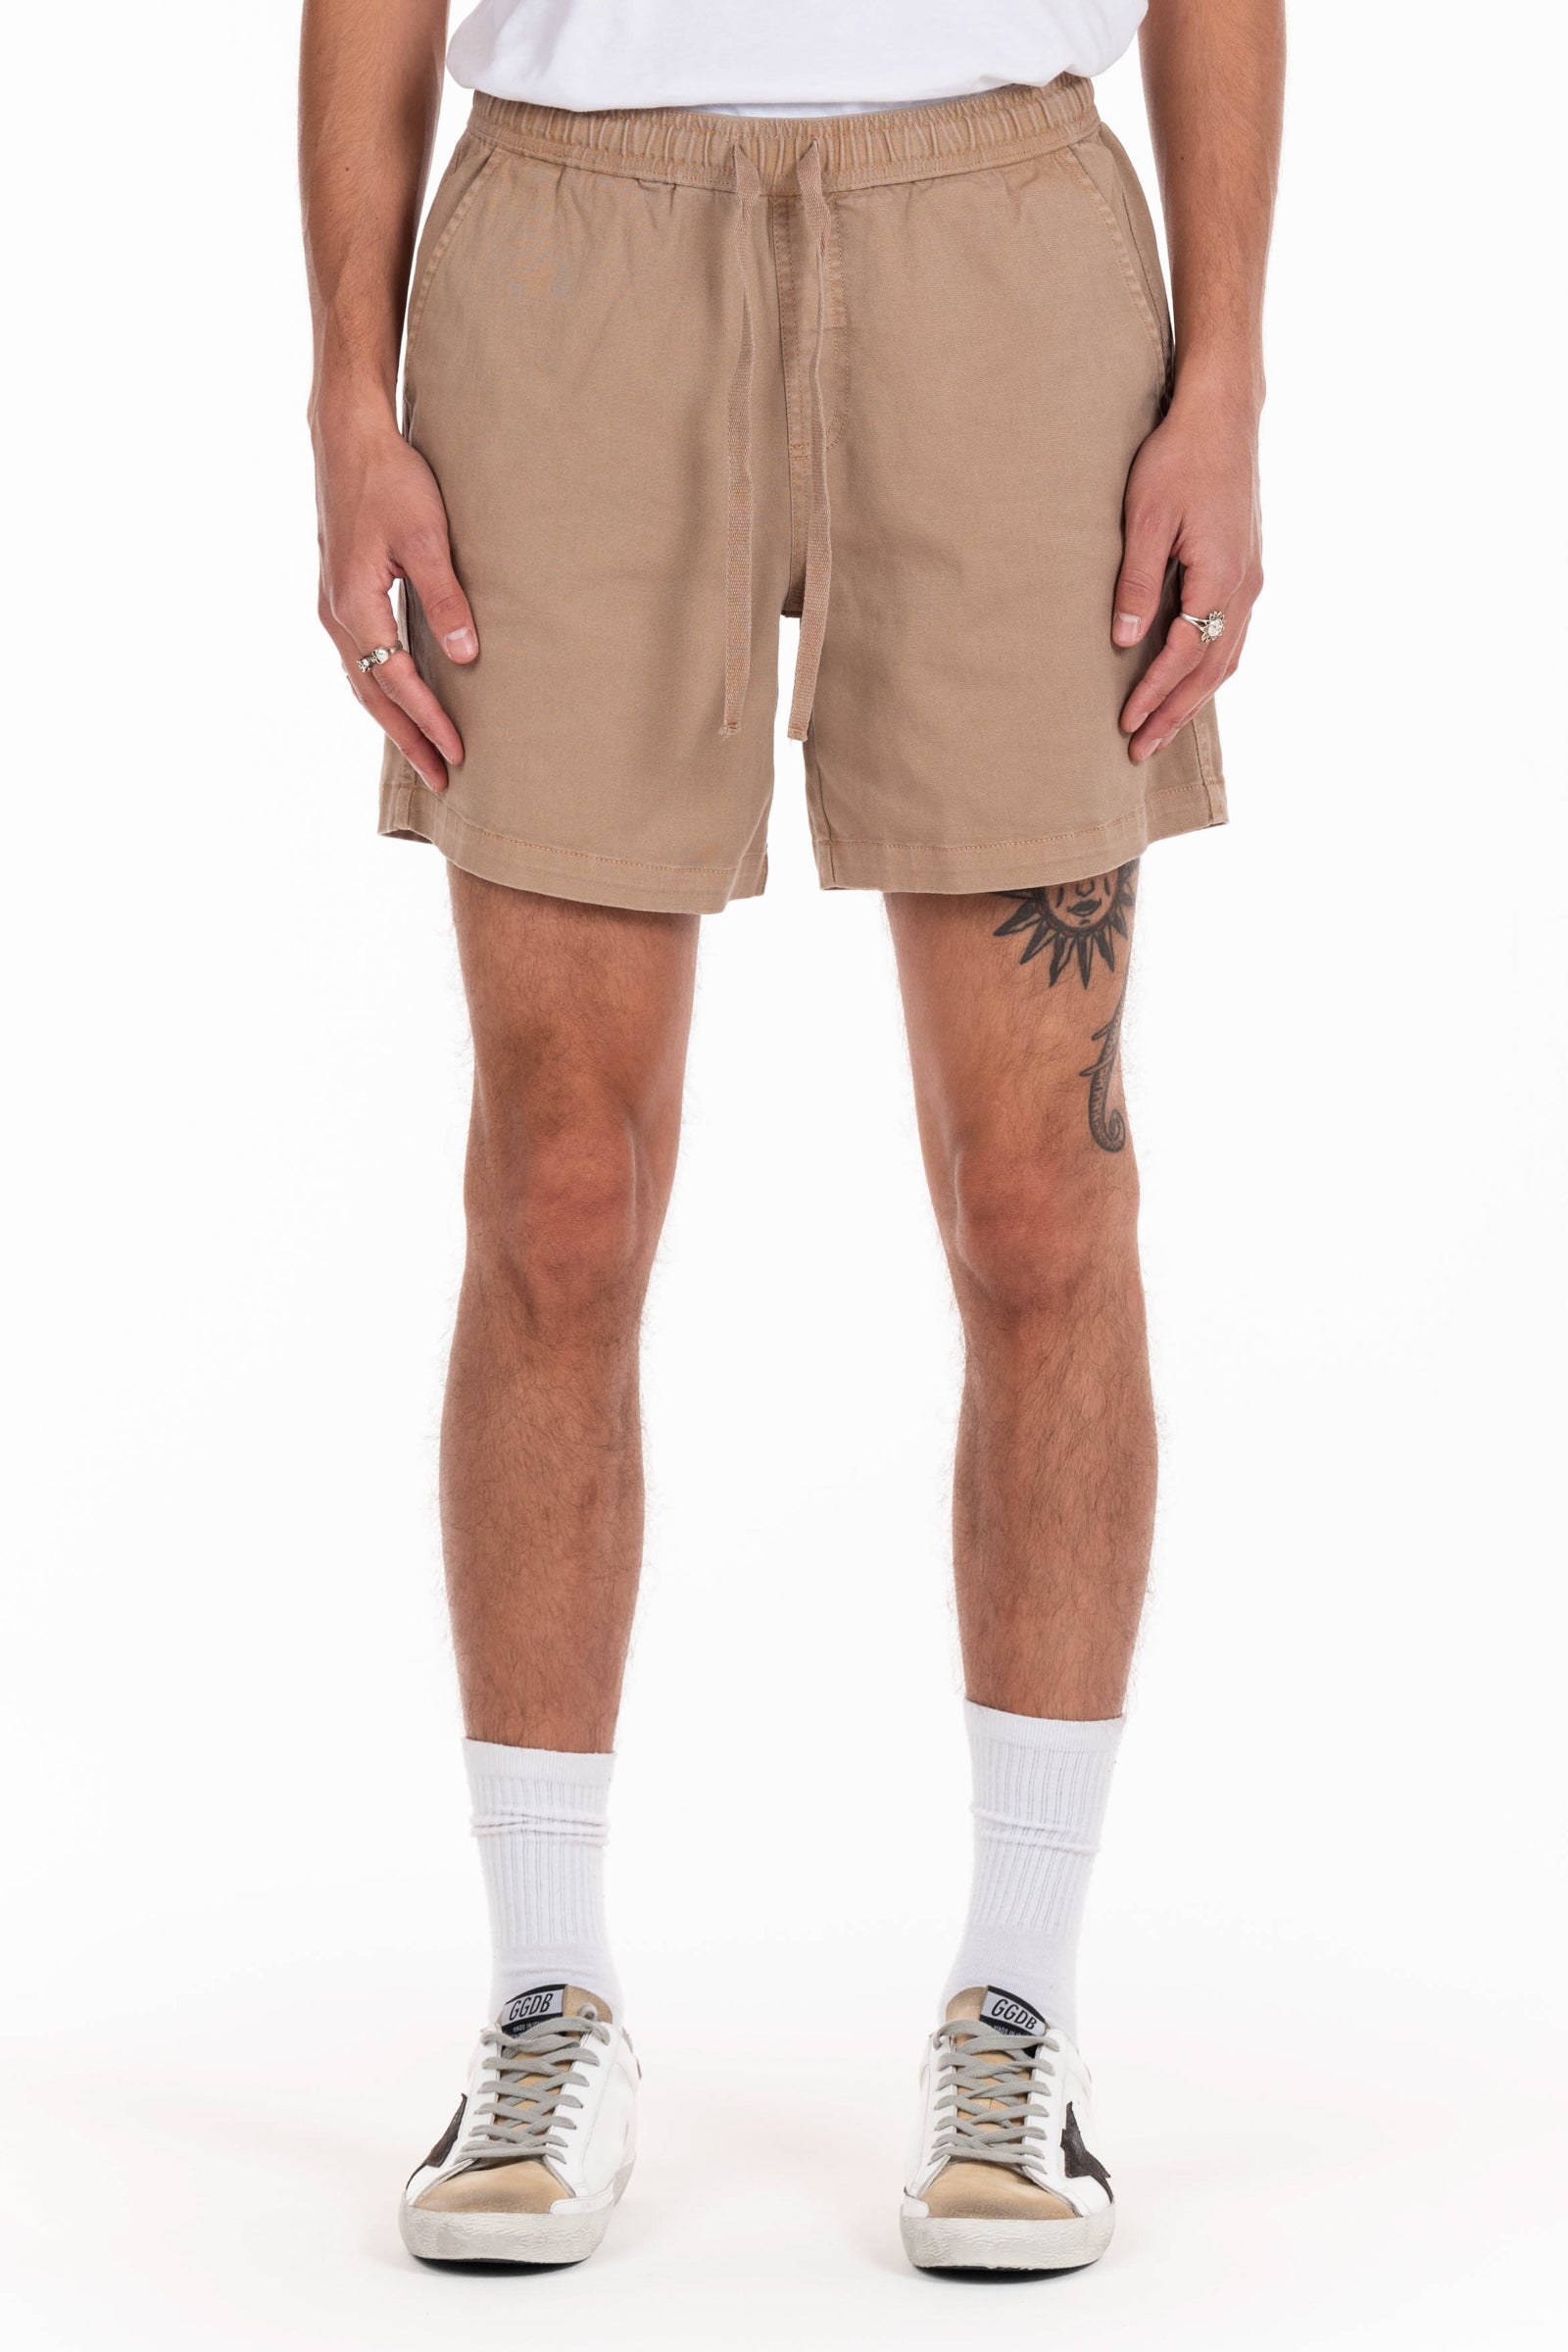 Original Paperbacks San Diego Volley Short in Khaki on Model Cropped Front View